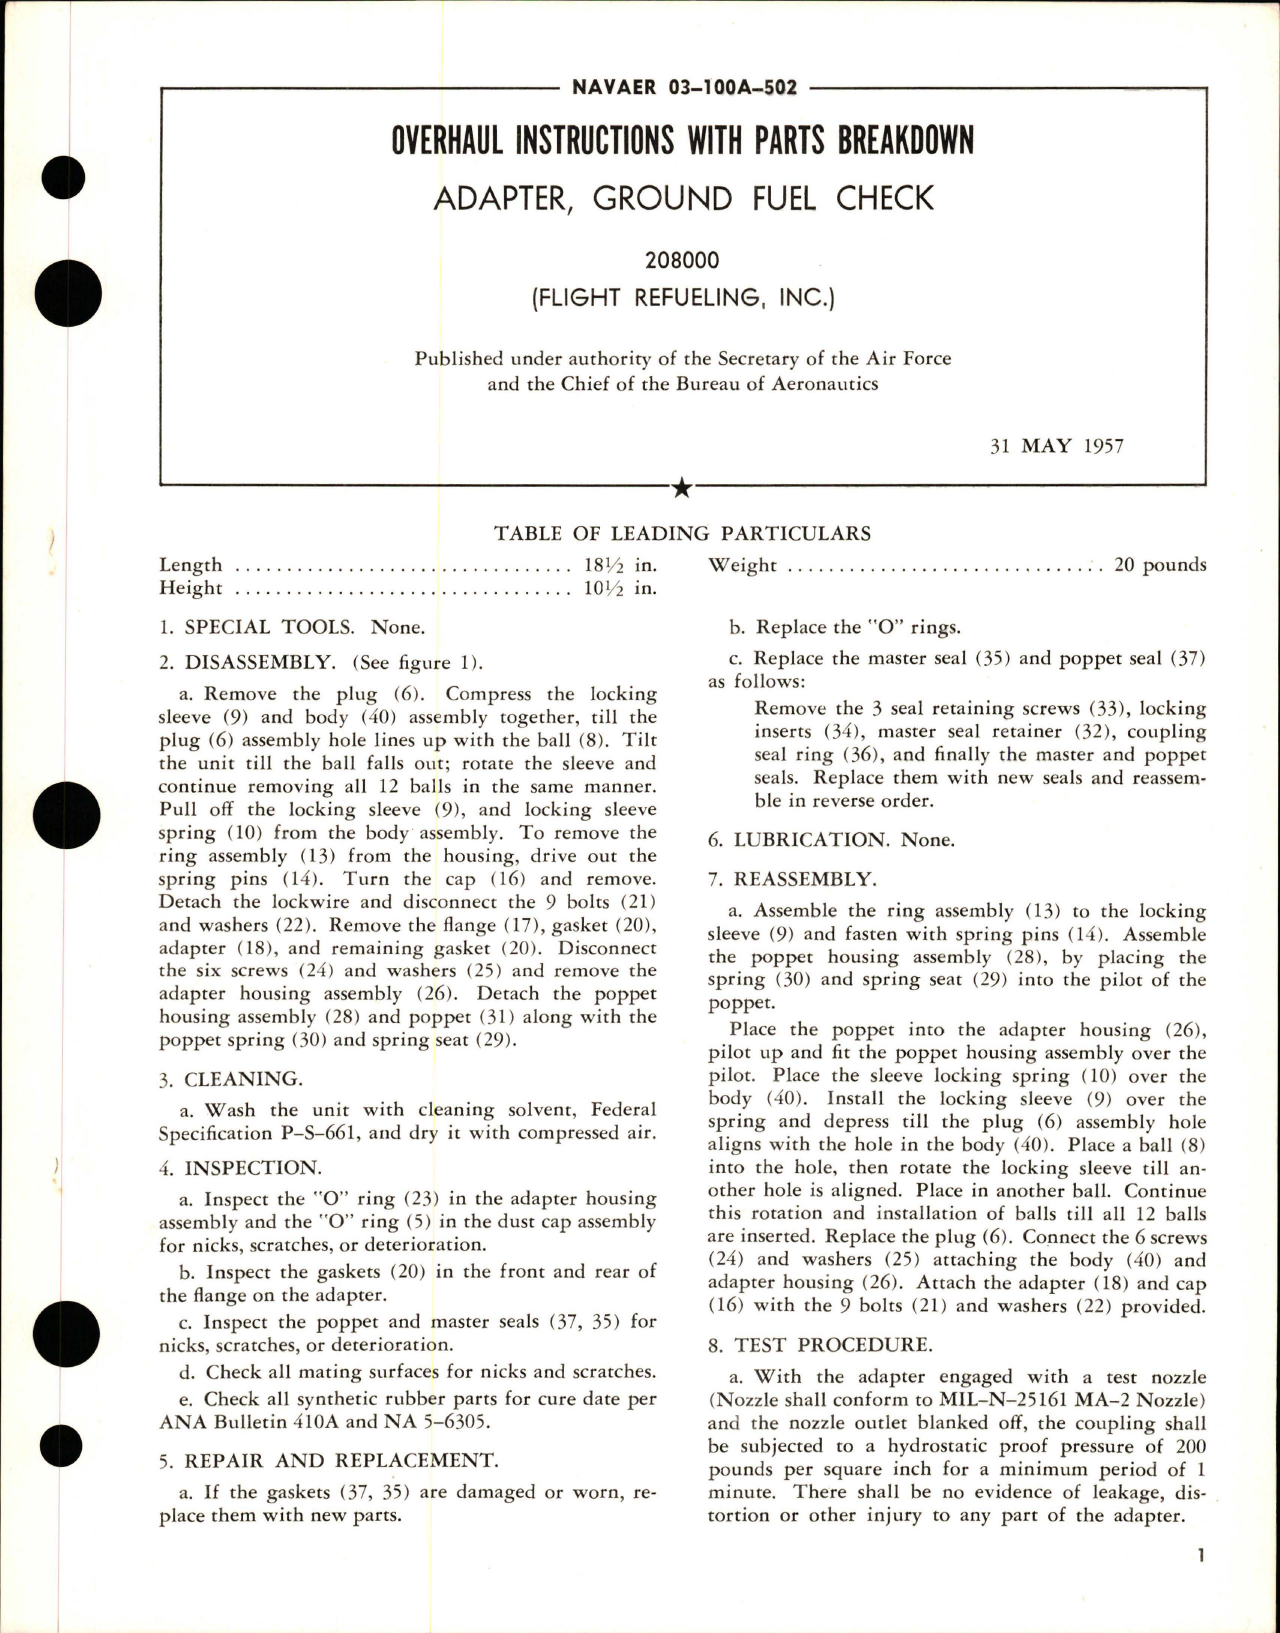 Sample page 1 from AirCorps Library document: Overhaul Instructions with Parts Breakdown for Ground Fuel Check Adapter - 208000